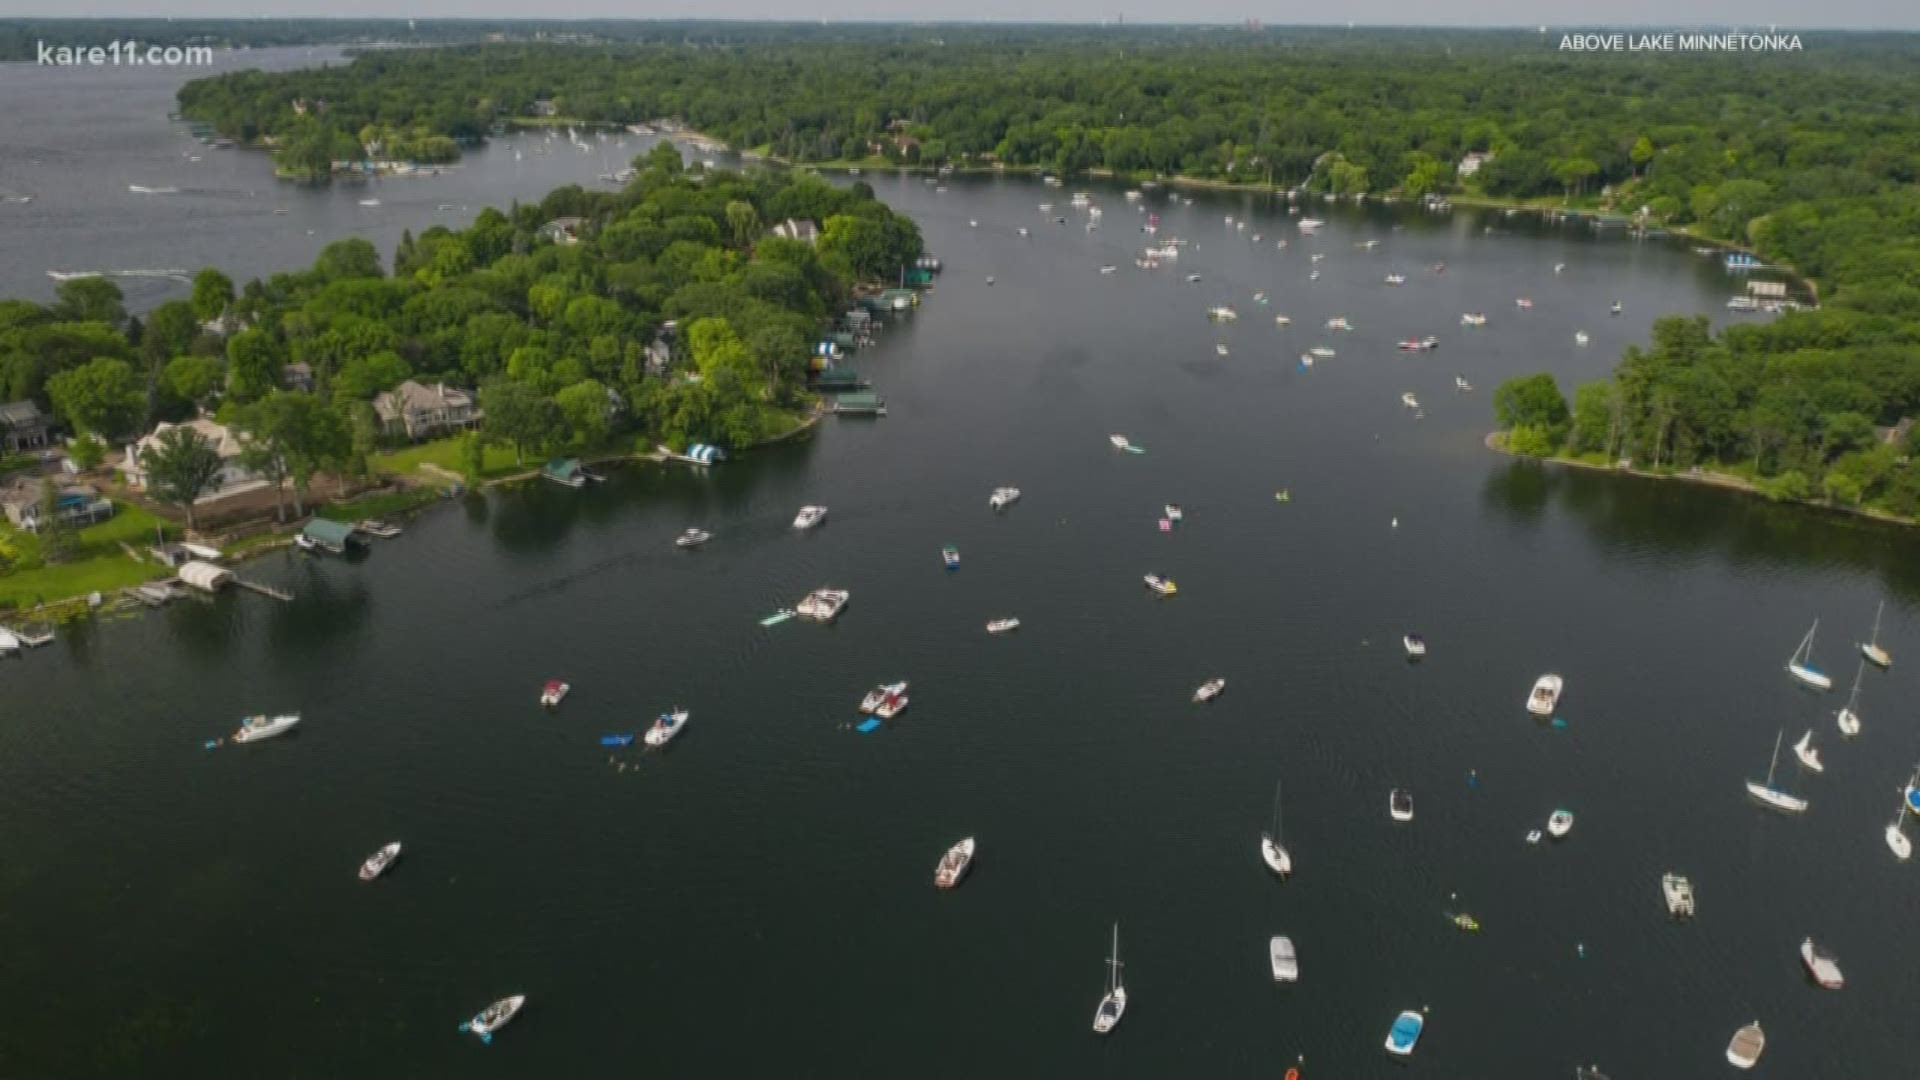 People who love, or live on Lake Minnetonka have a new way to see the lake and everything it has to offer.